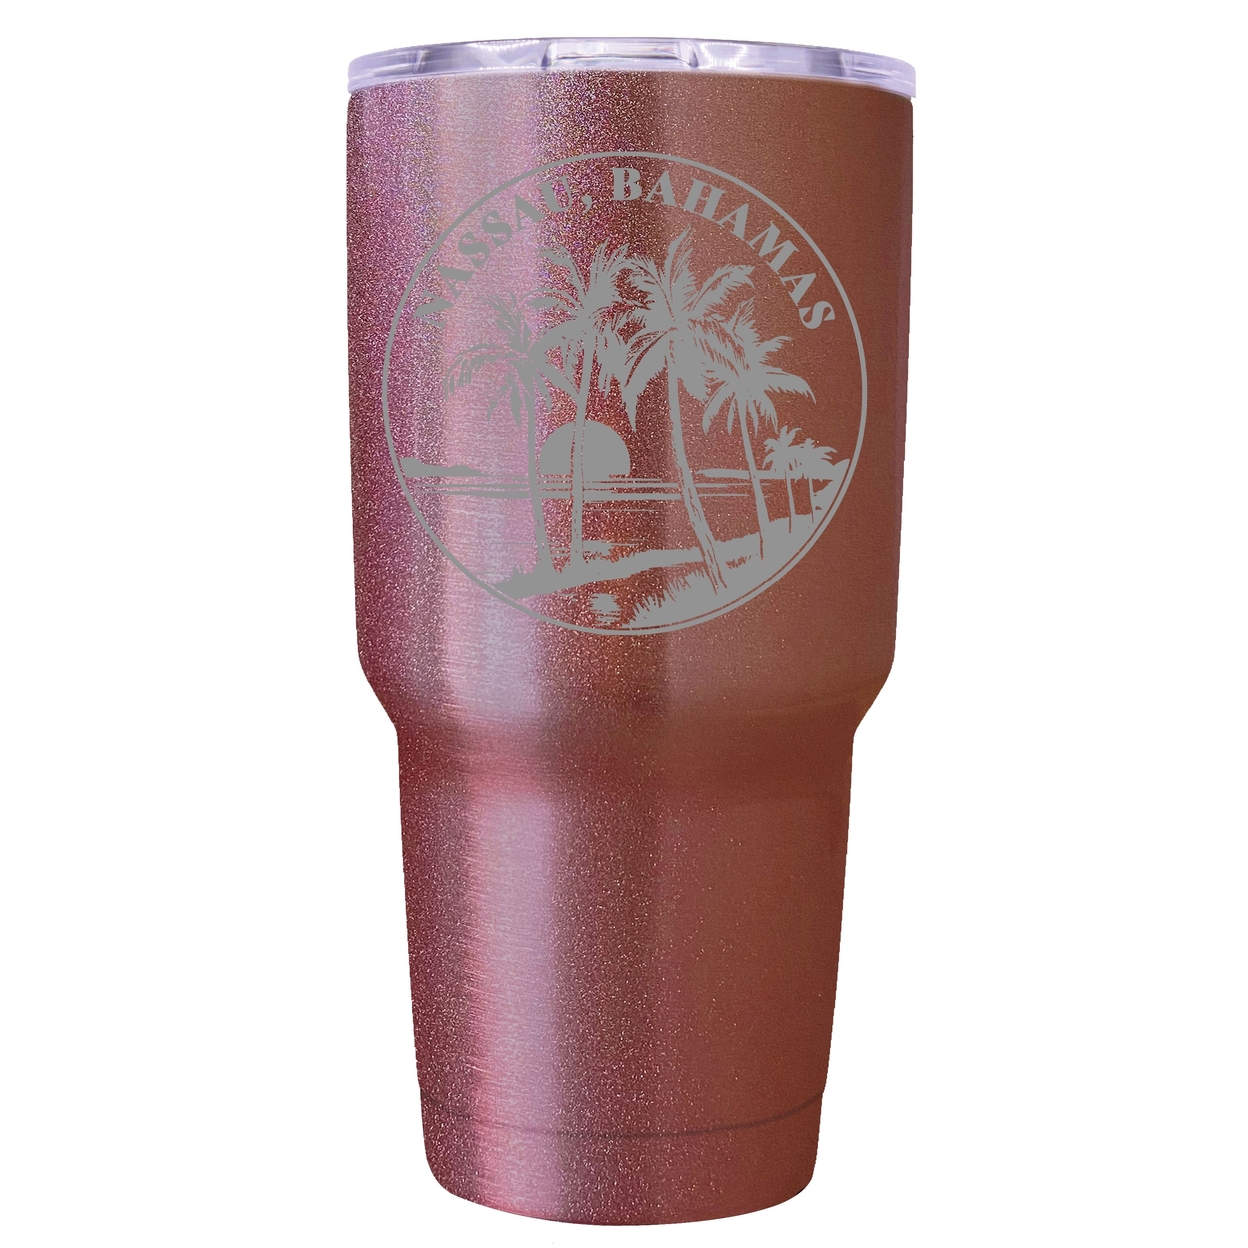 Nassau The Bahamas Souvenir 24 Oz Engraved Insulated Stainless Steel Tumbler - Coral,,Single Unit